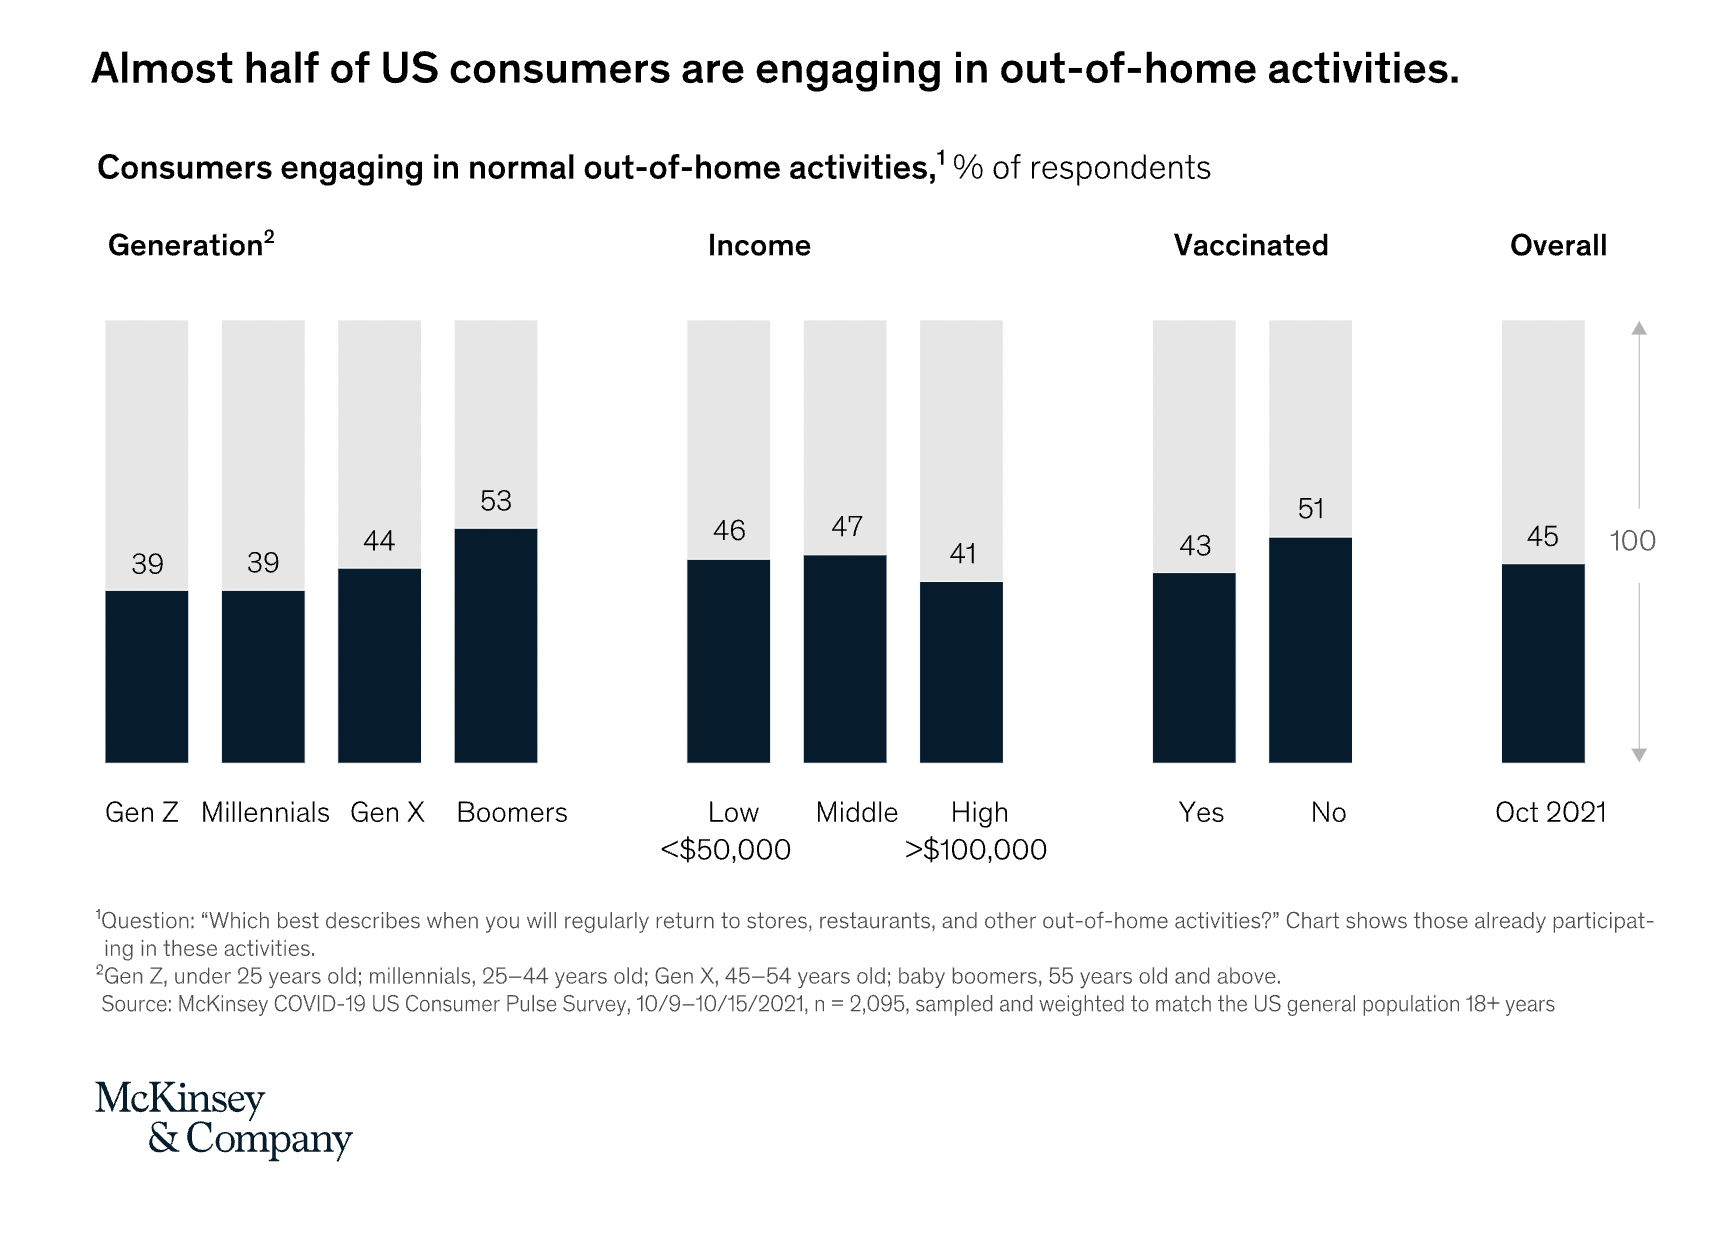 Almost half of US consumers are engaging in out-of-home activities - McKinsey